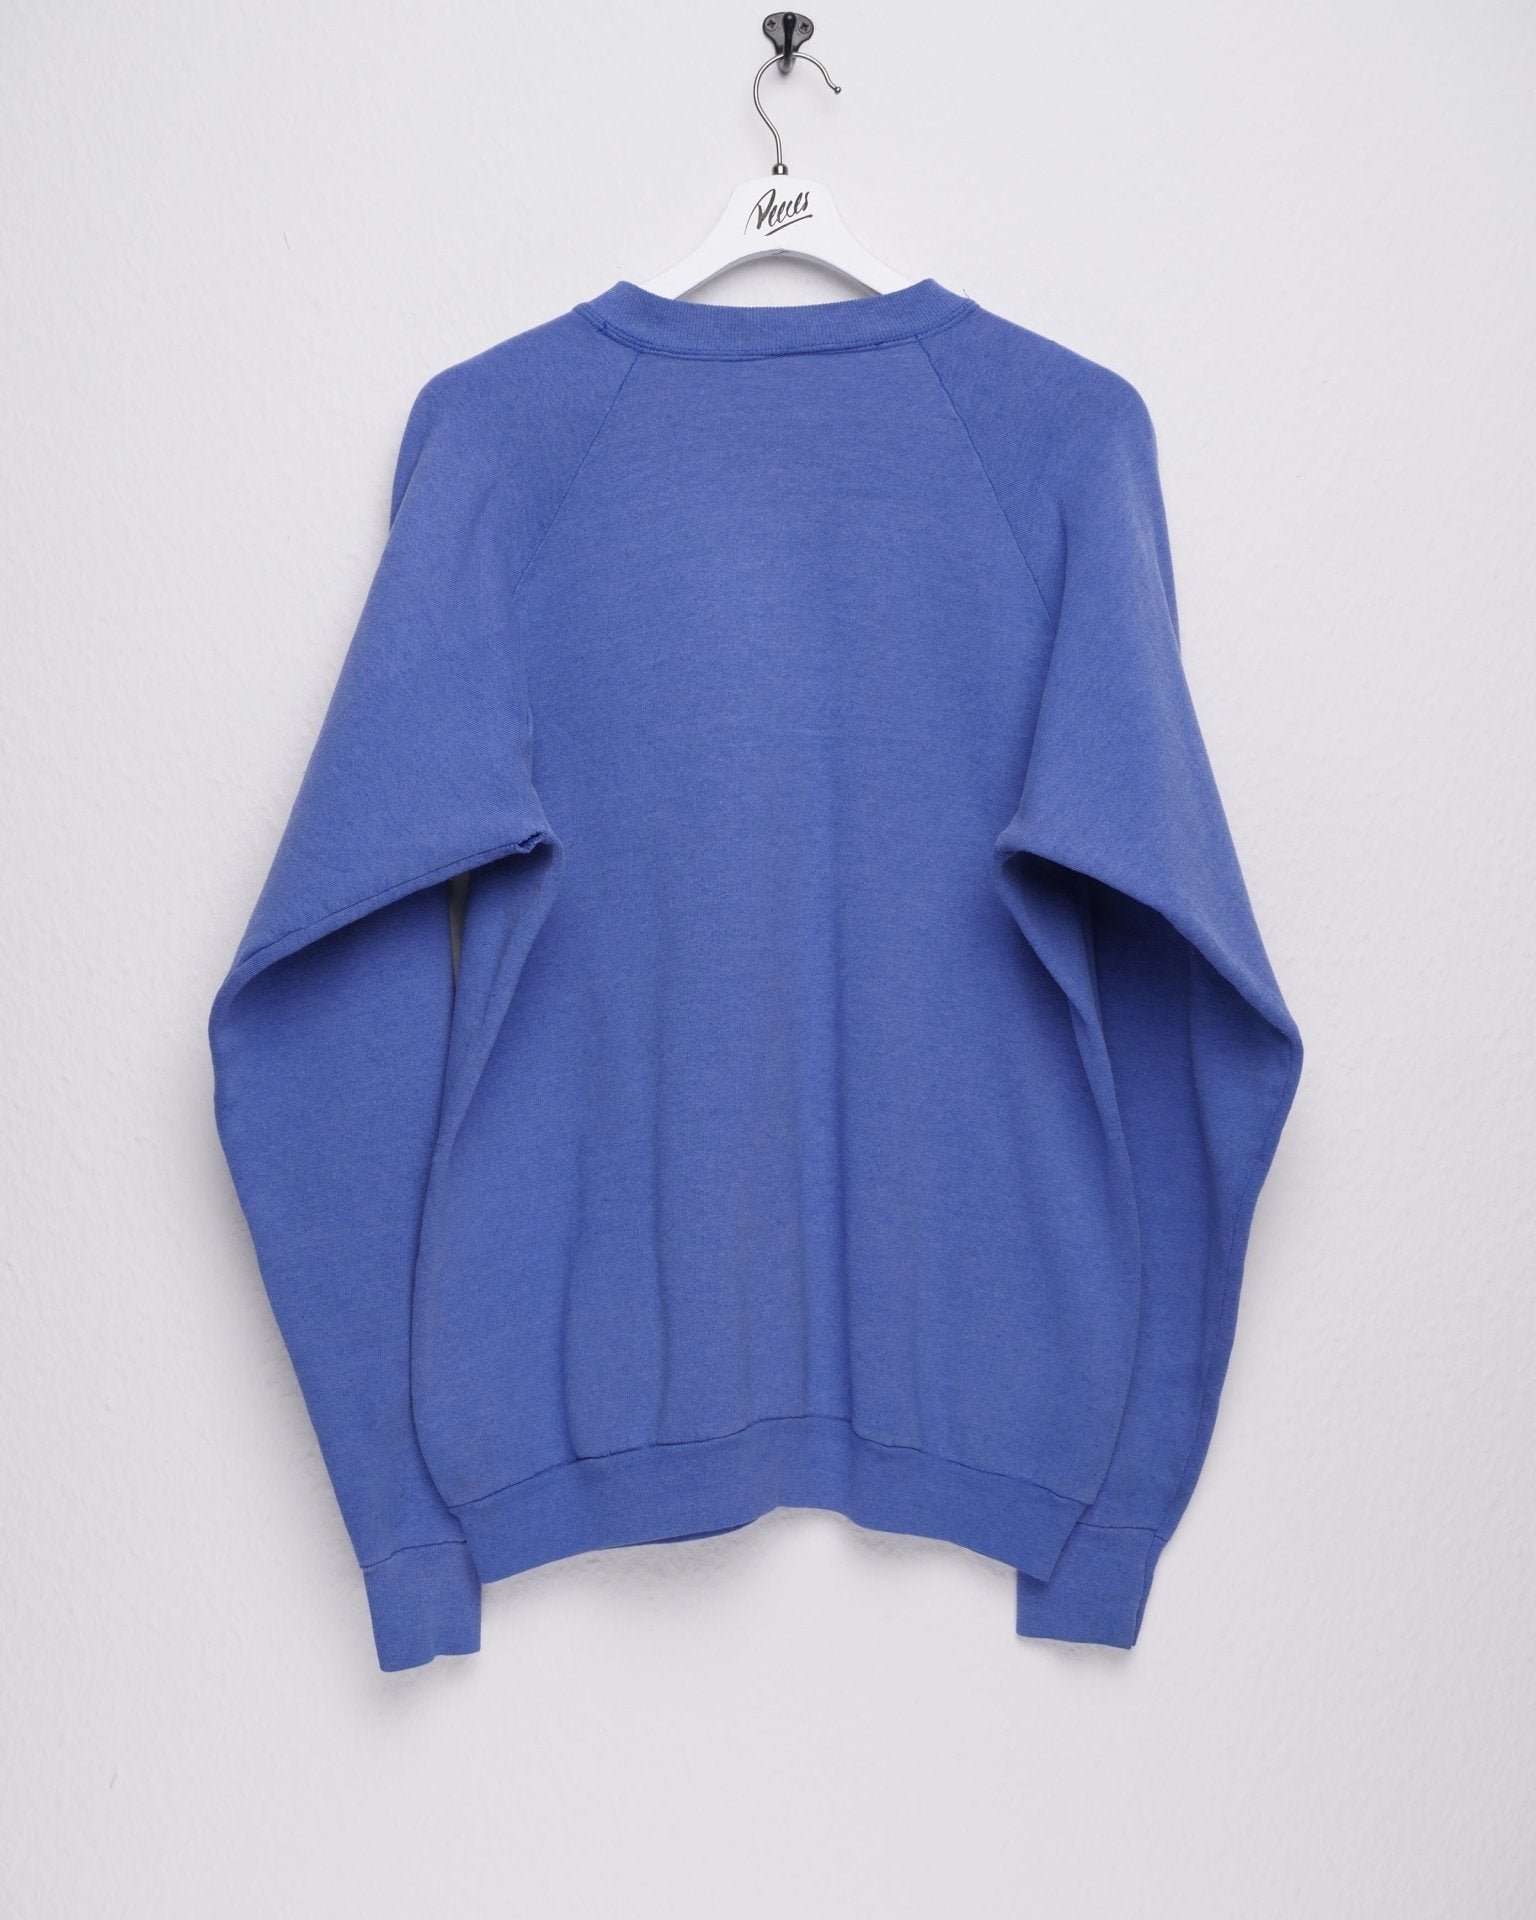 printed 'Captain' Spellout washed blue Sweater - Peeces